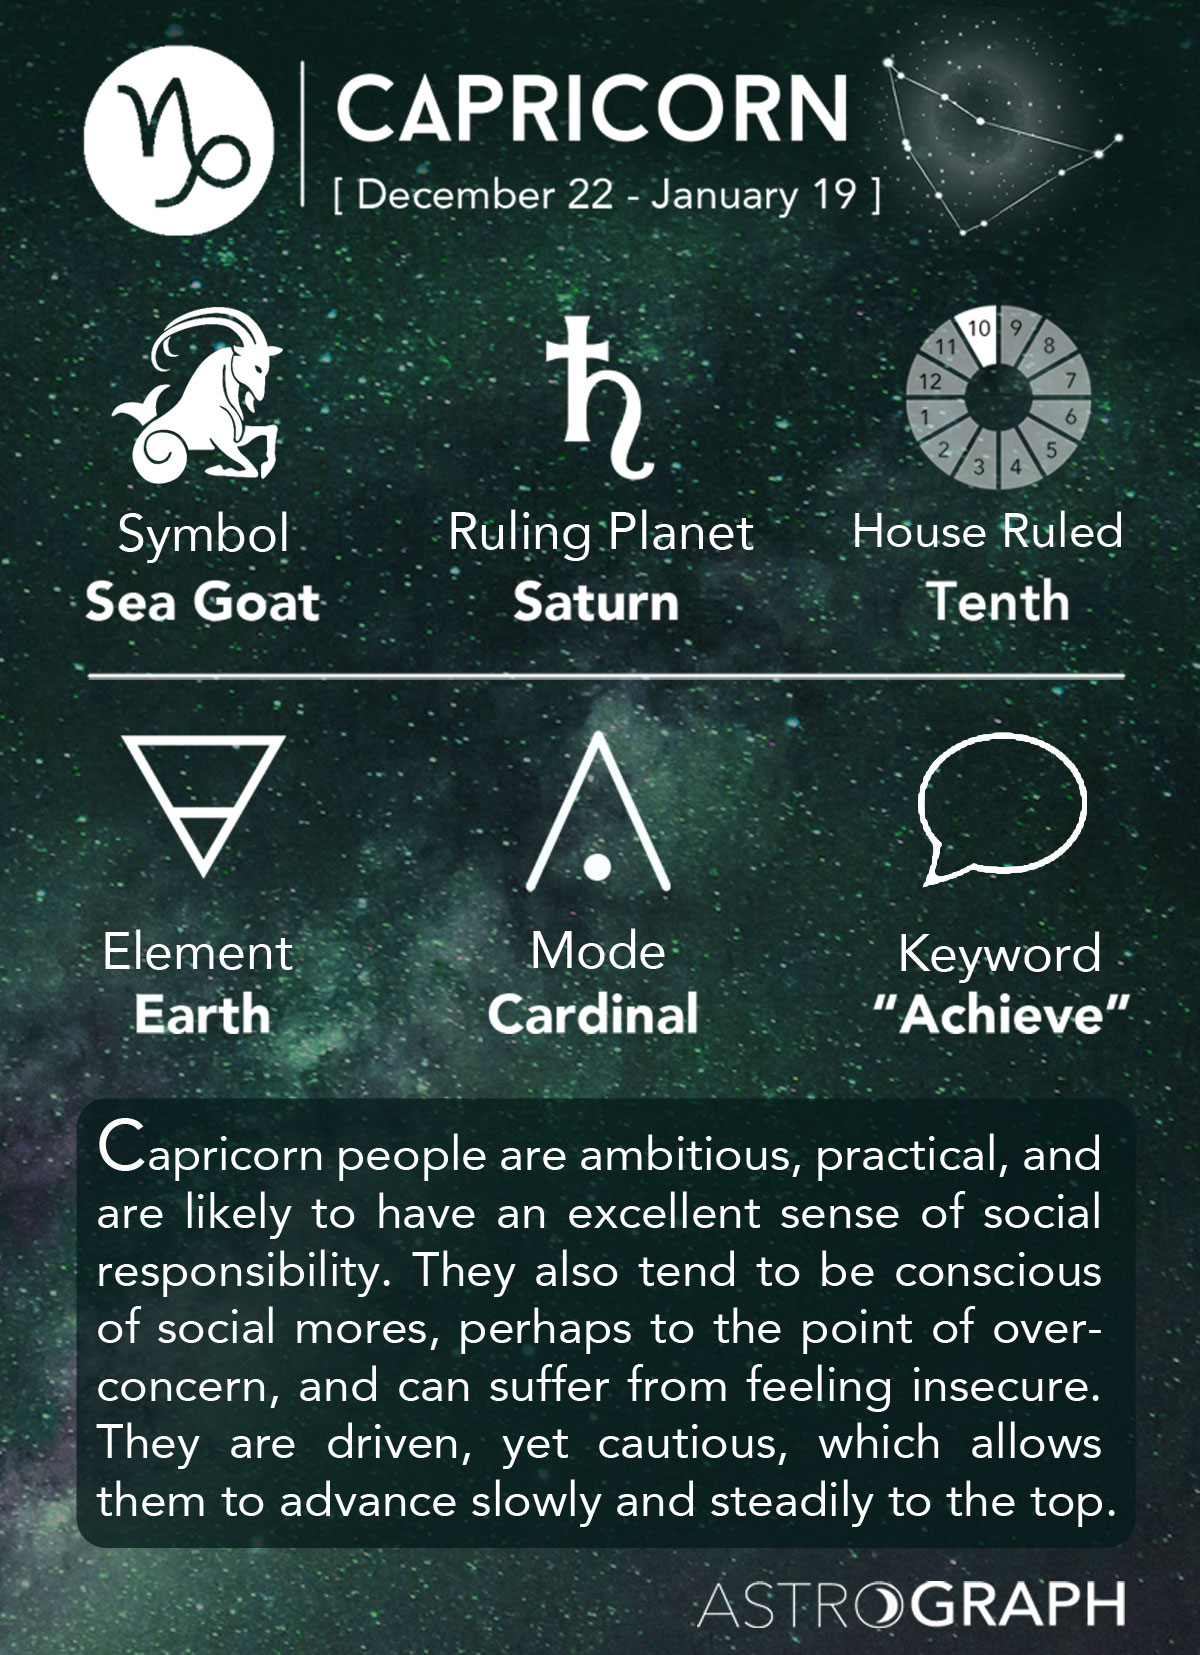 What does Capricorn represent in astrology?